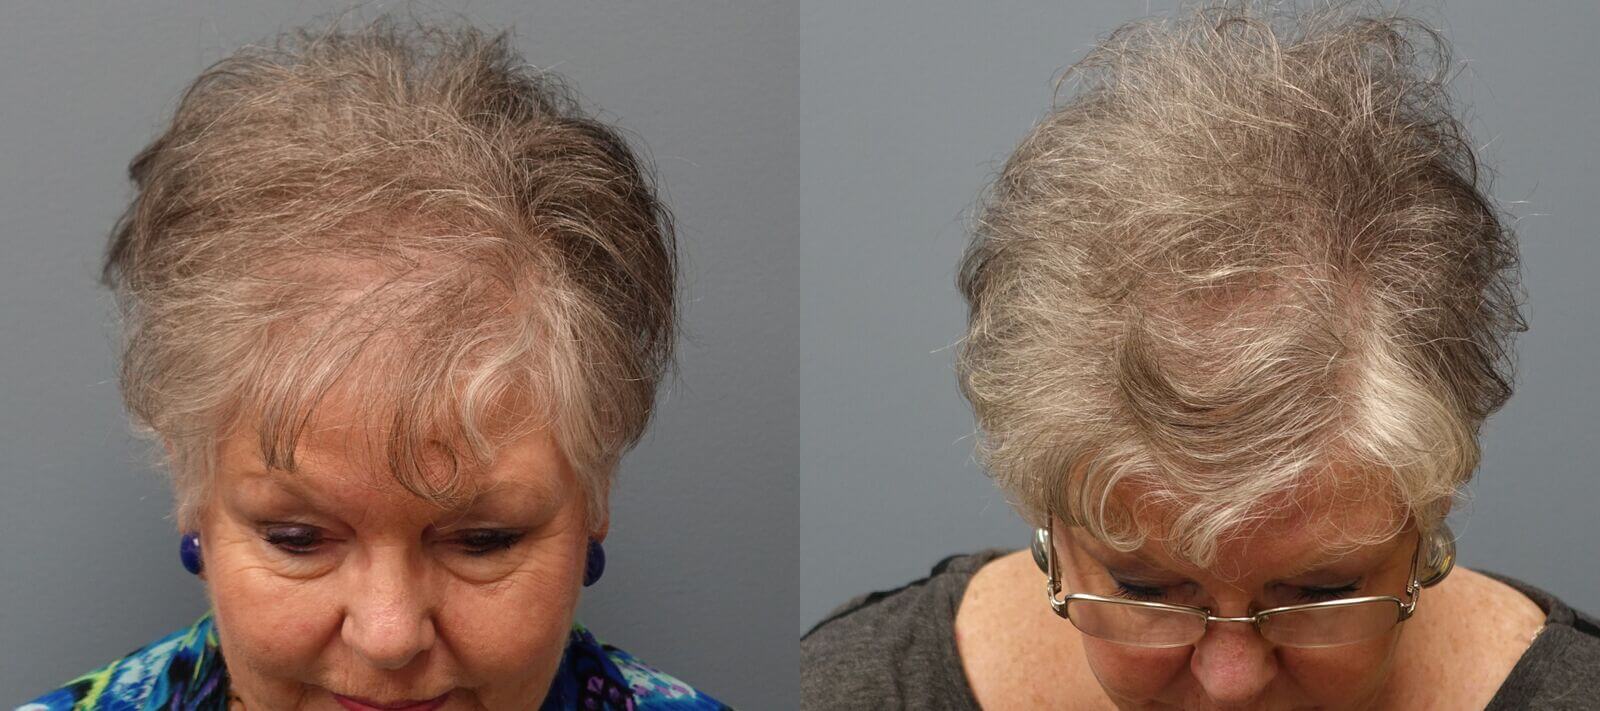 Hair transplant with Neograft 66 year old 1,325 grafts Before and 11 months after